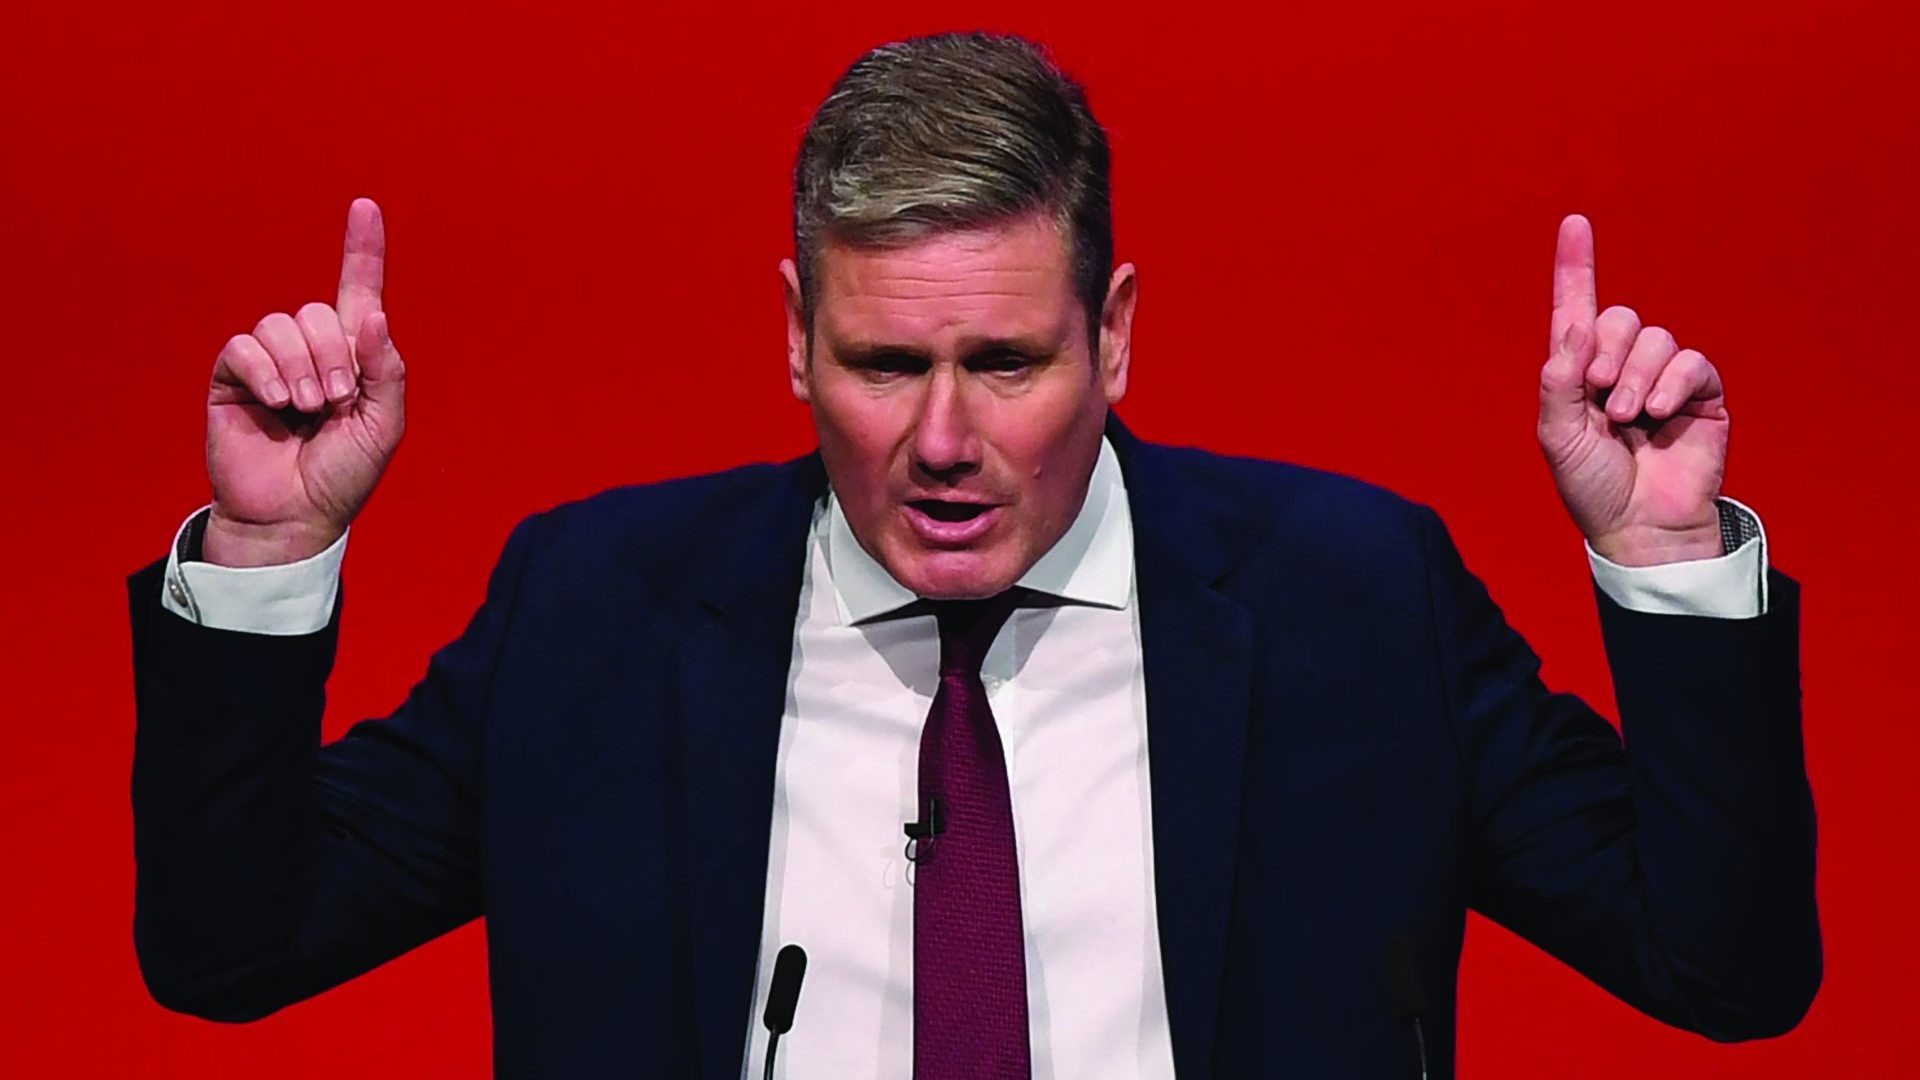 Keir Starmer needs a 12% swing to win an overall majority – and his voters may not be who he thinks they are. Photo: Daniel Leal/ AFP/Getty Images.